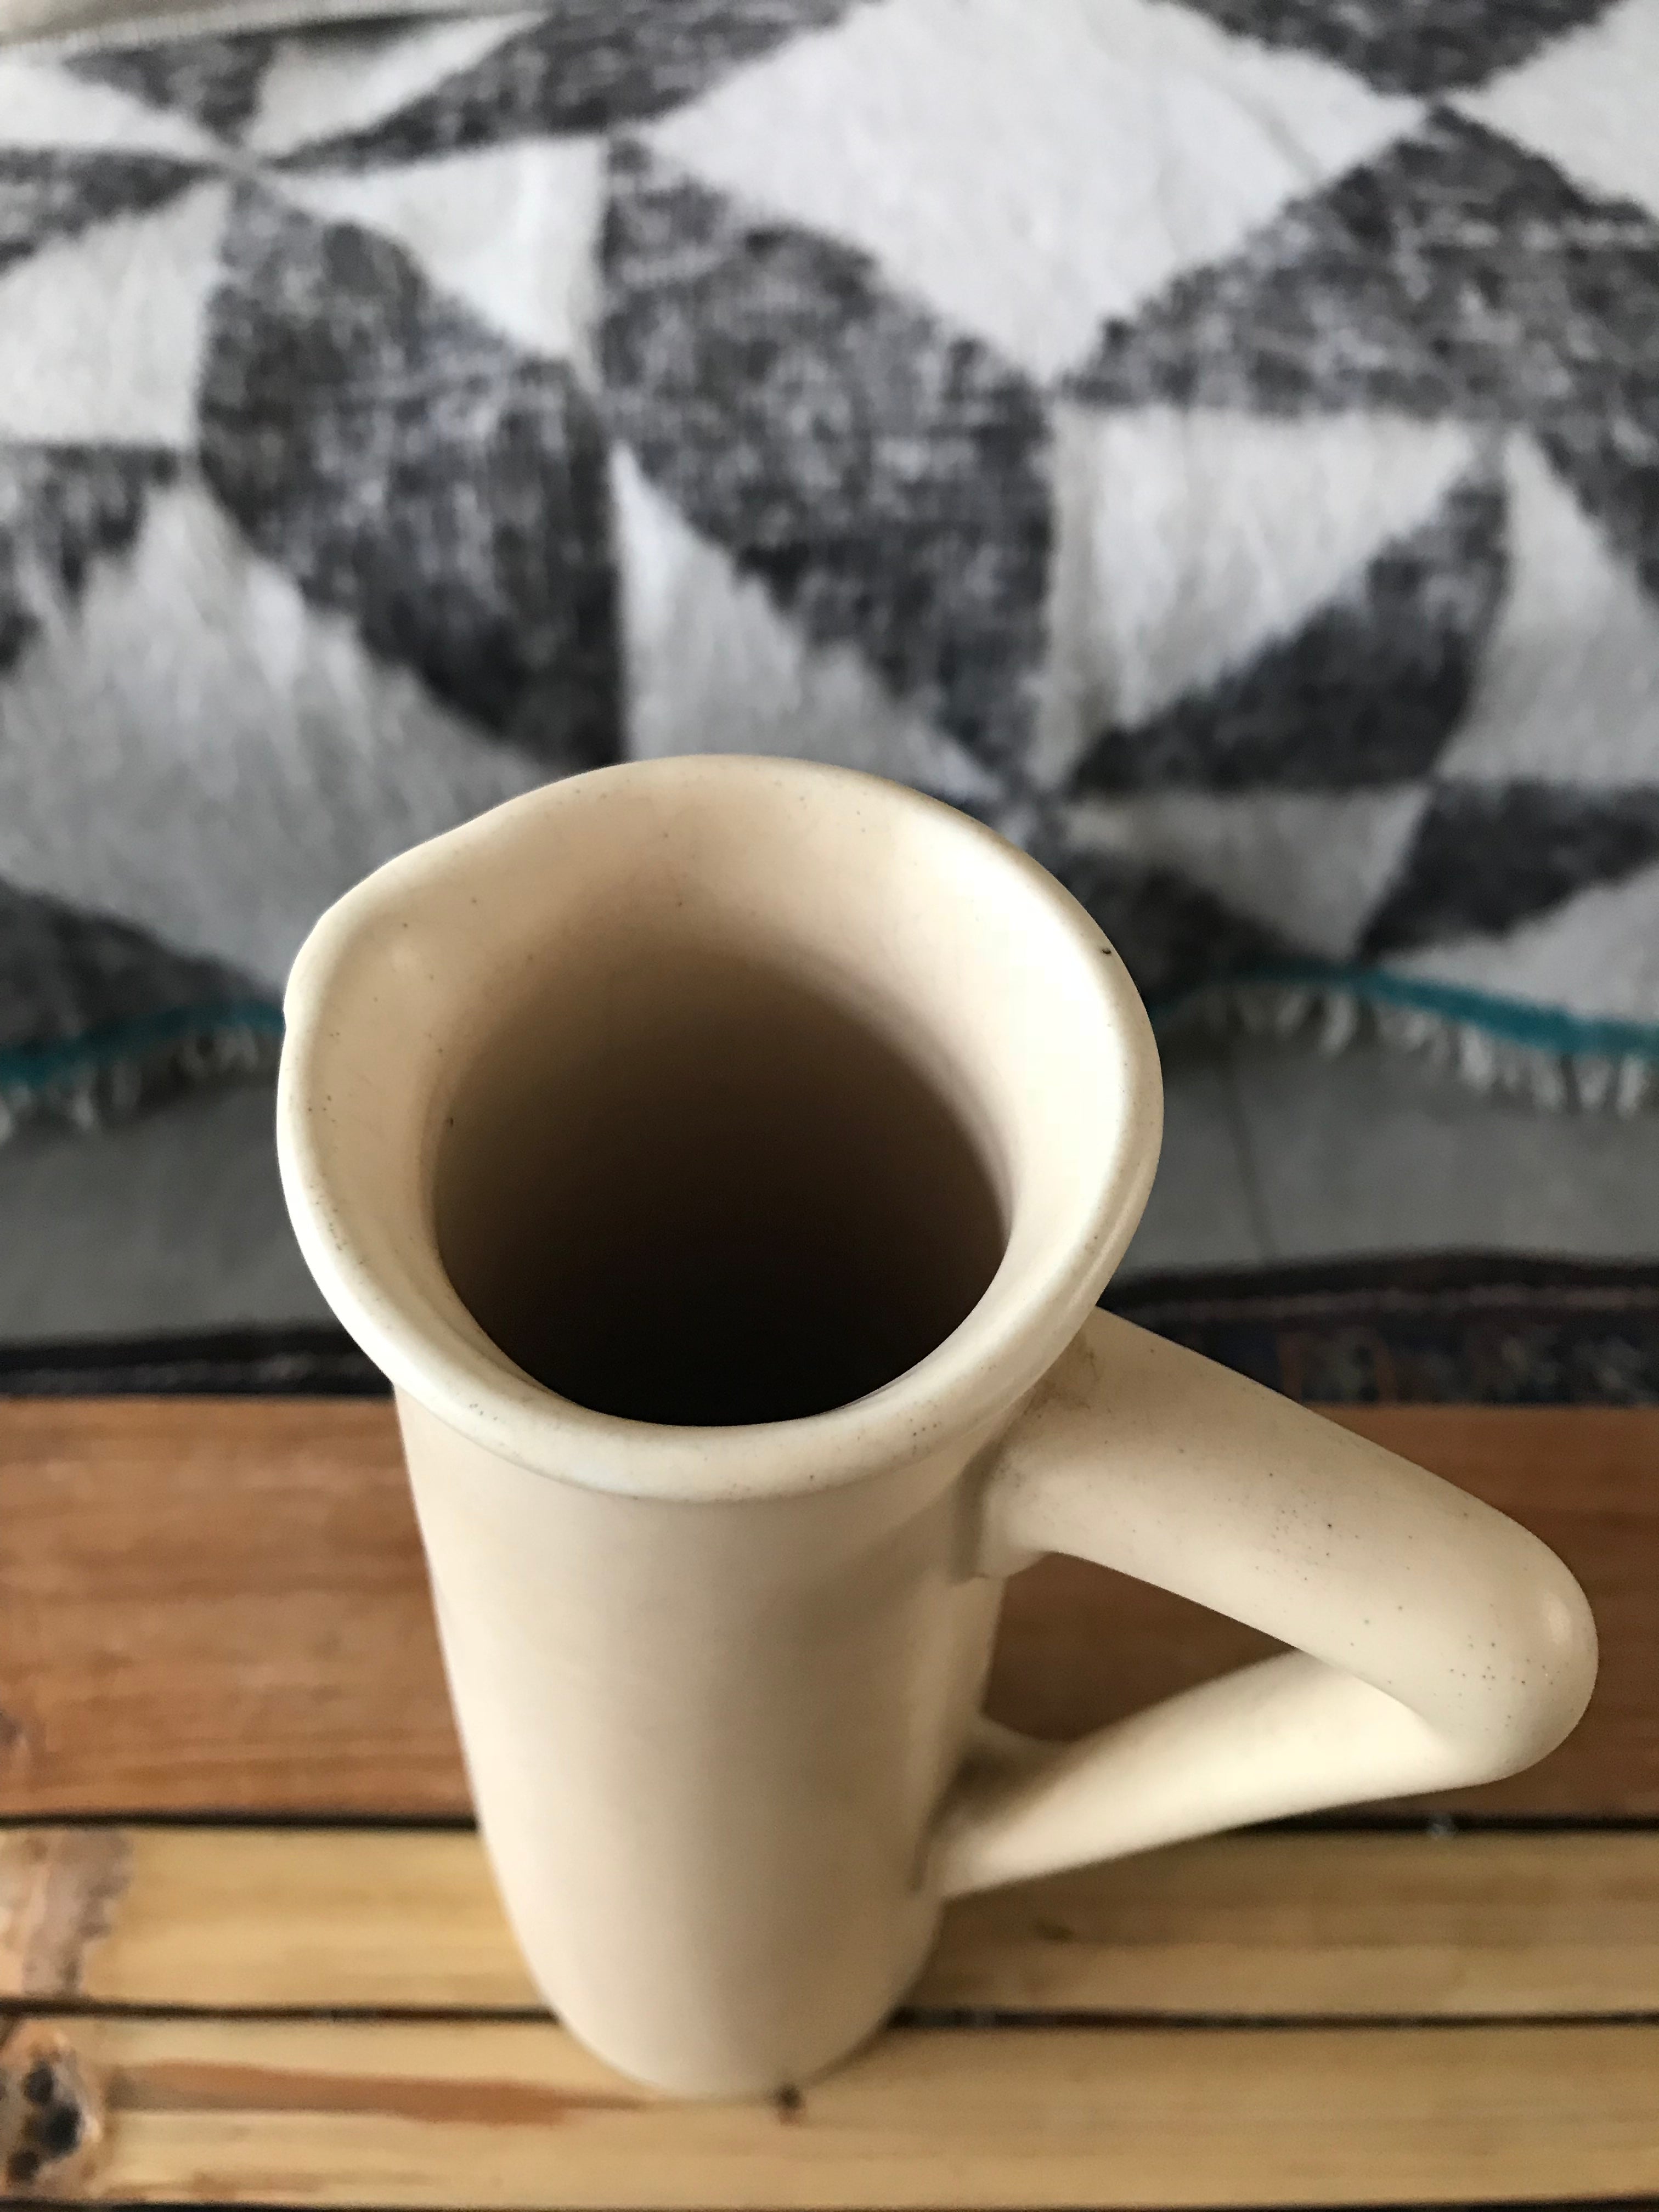 Tall Ceramic Vase (with handle)